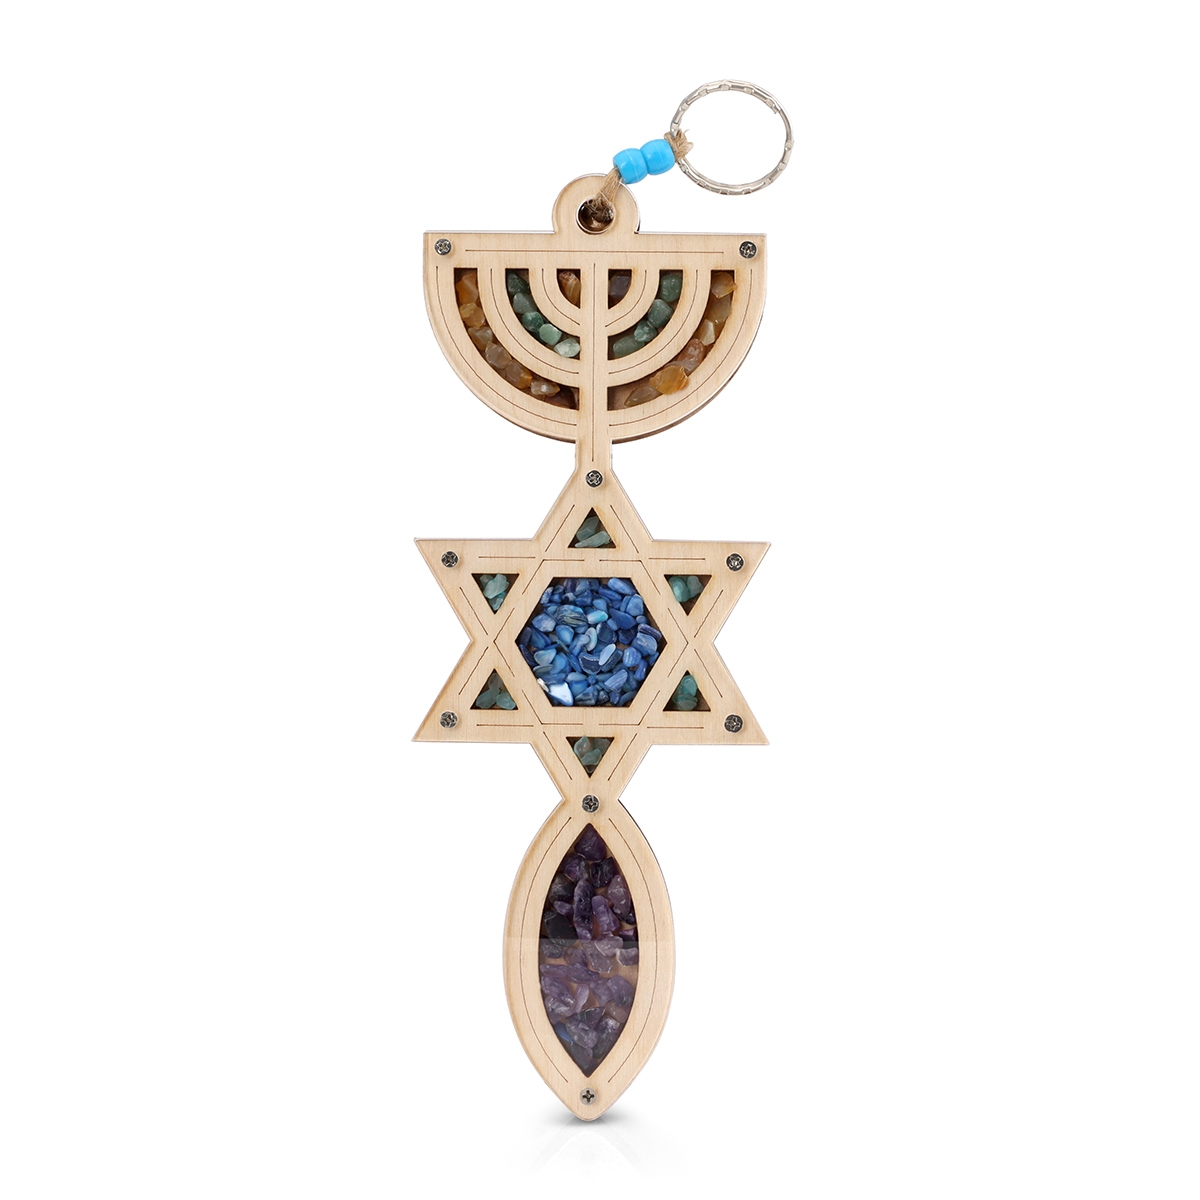 Grafted-In (Messianic) Wooden Wall Hanging with Natural Colored Stones from the Holy Land - 1